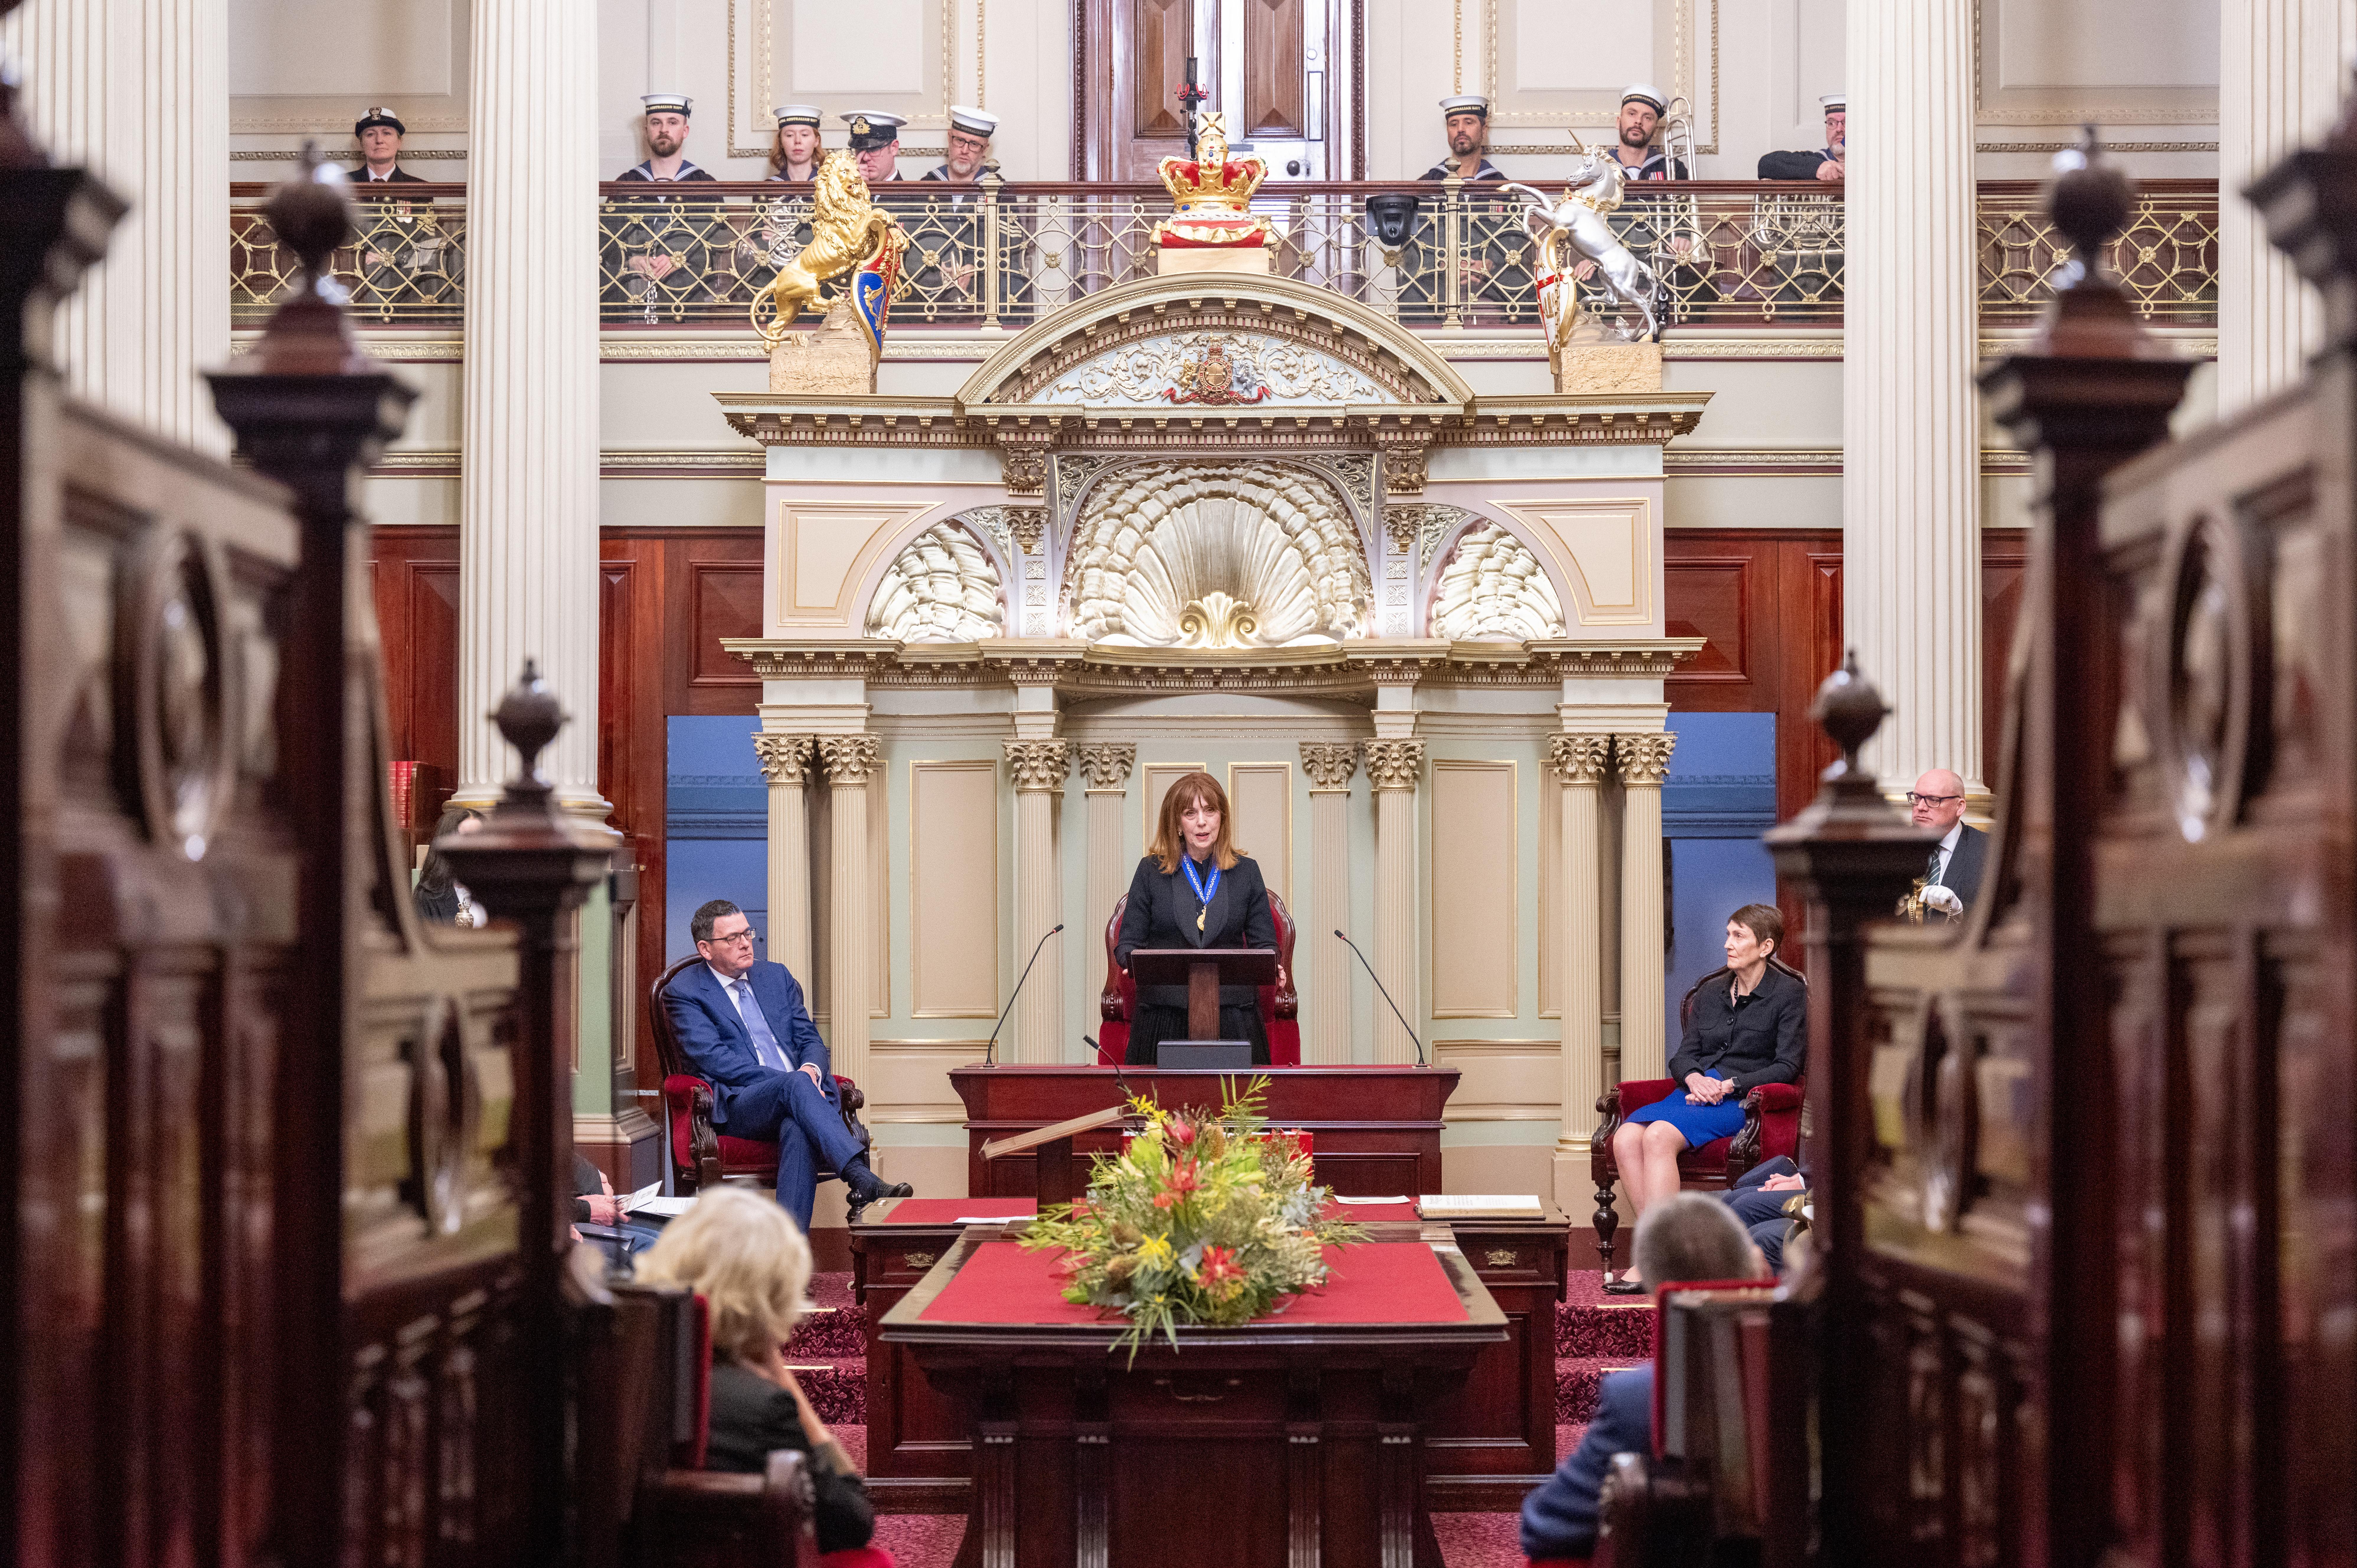 Inauguration of the Governor of Victoria